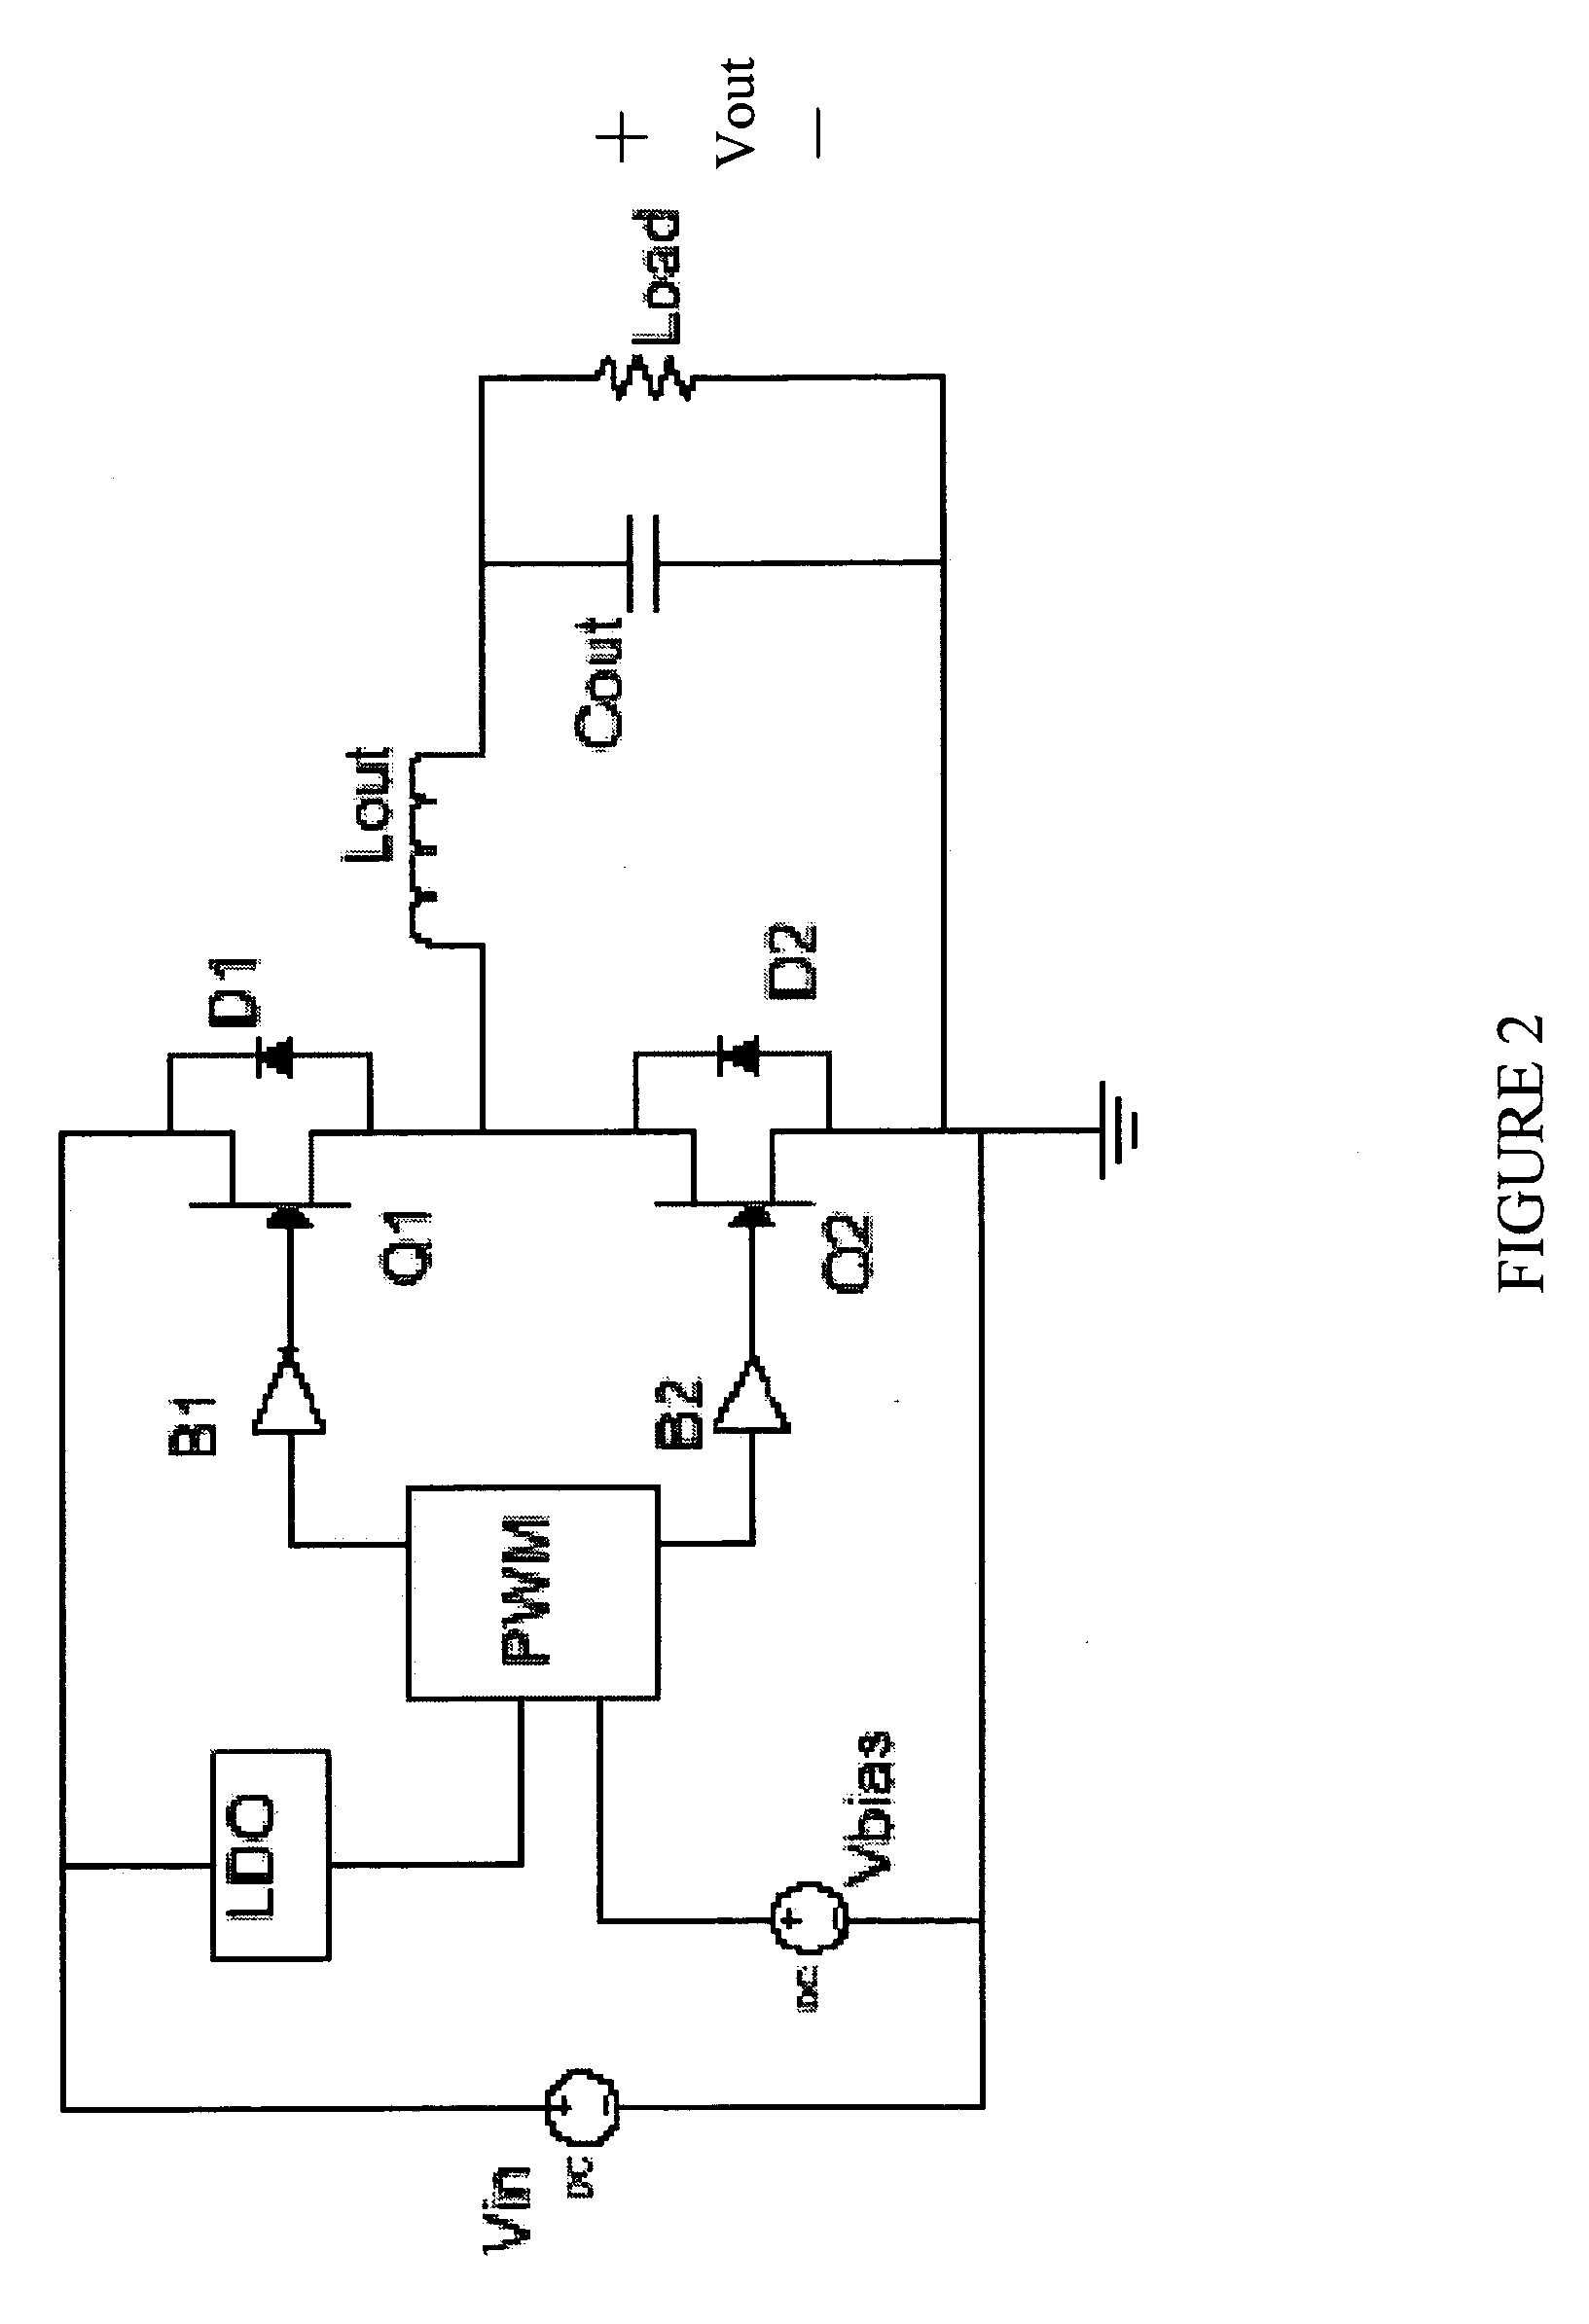 Control circuit for a depletion mode switch and method of operating the same